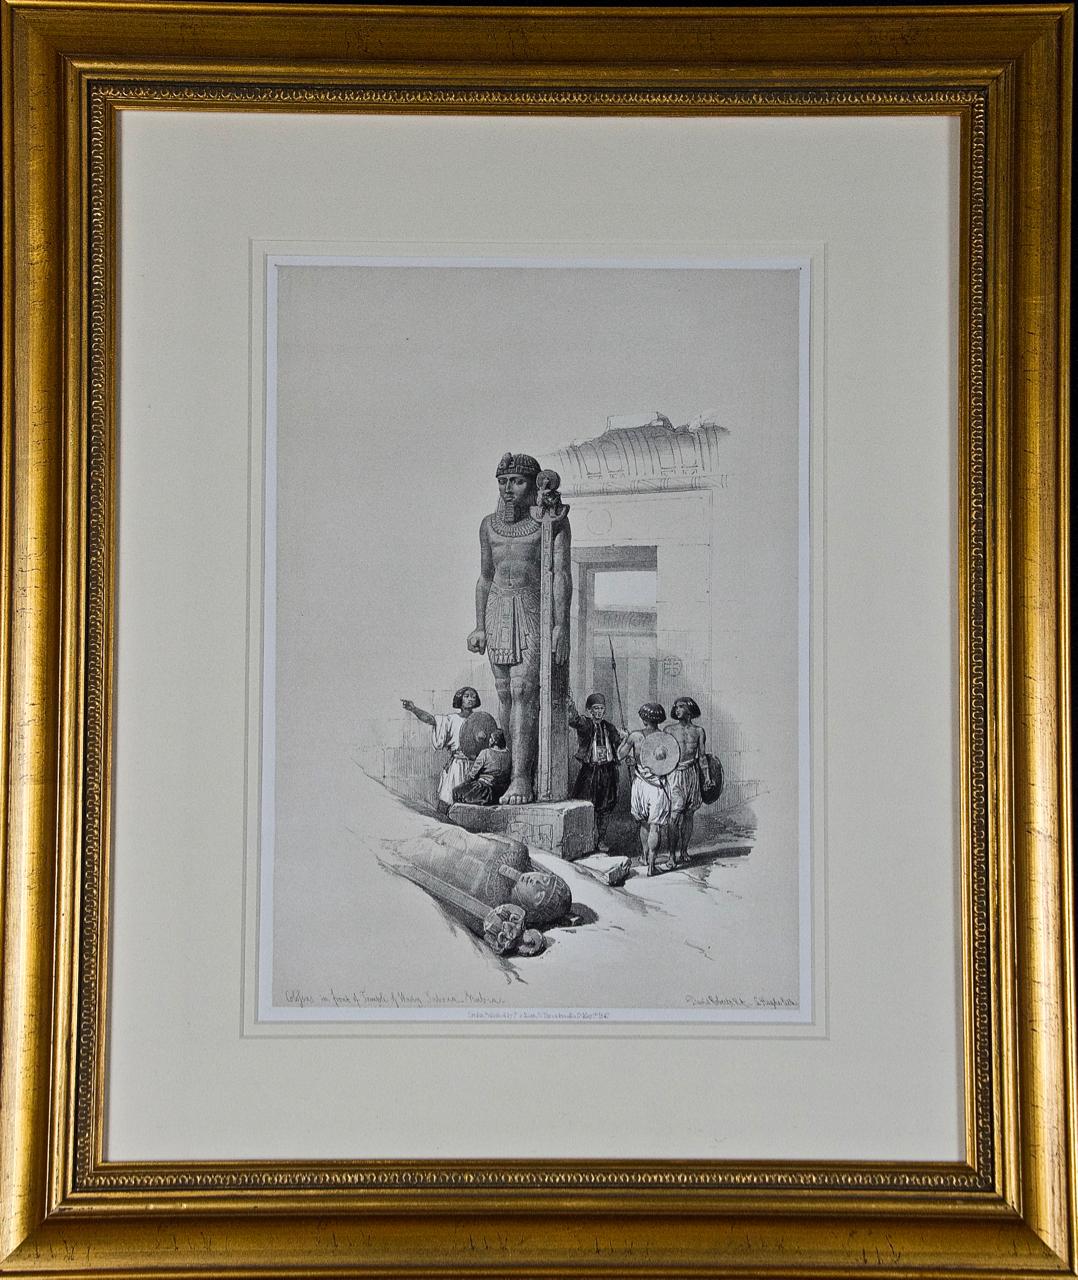 David Roberts' 19th Century Duo-tone Lithograph: Colossus of the Temple of Wady